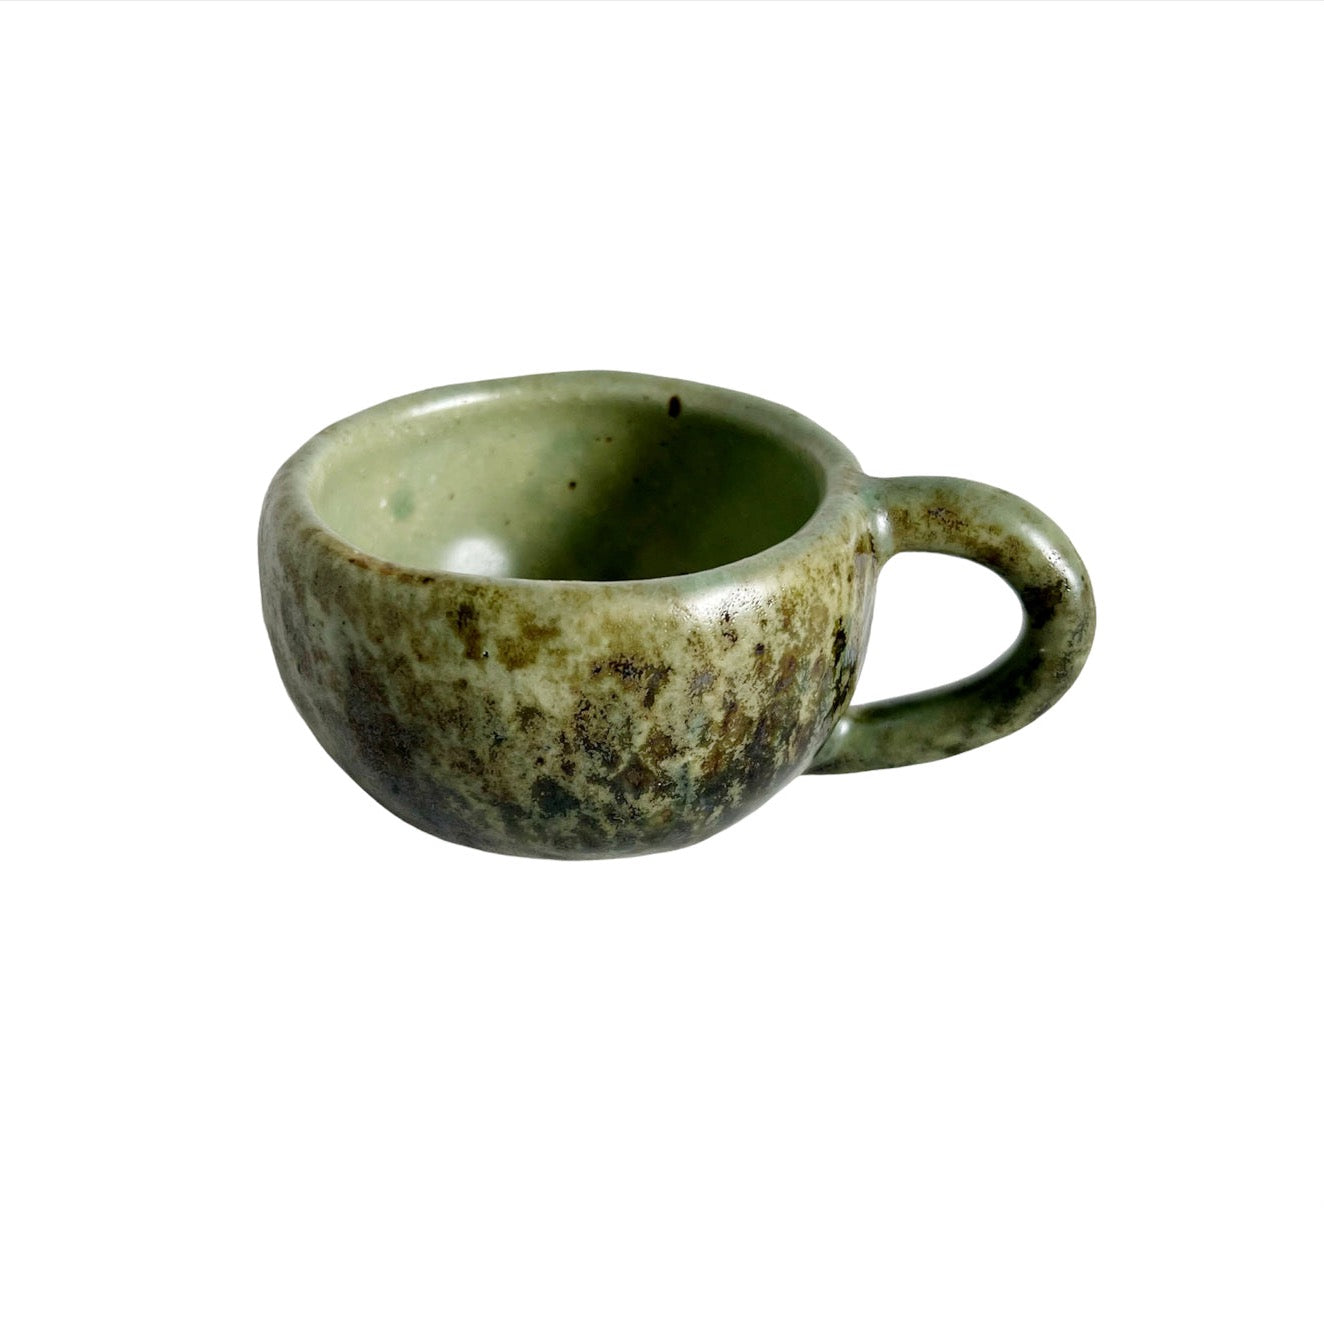 handmade coffee cups from Mexico with a green and brown glaze